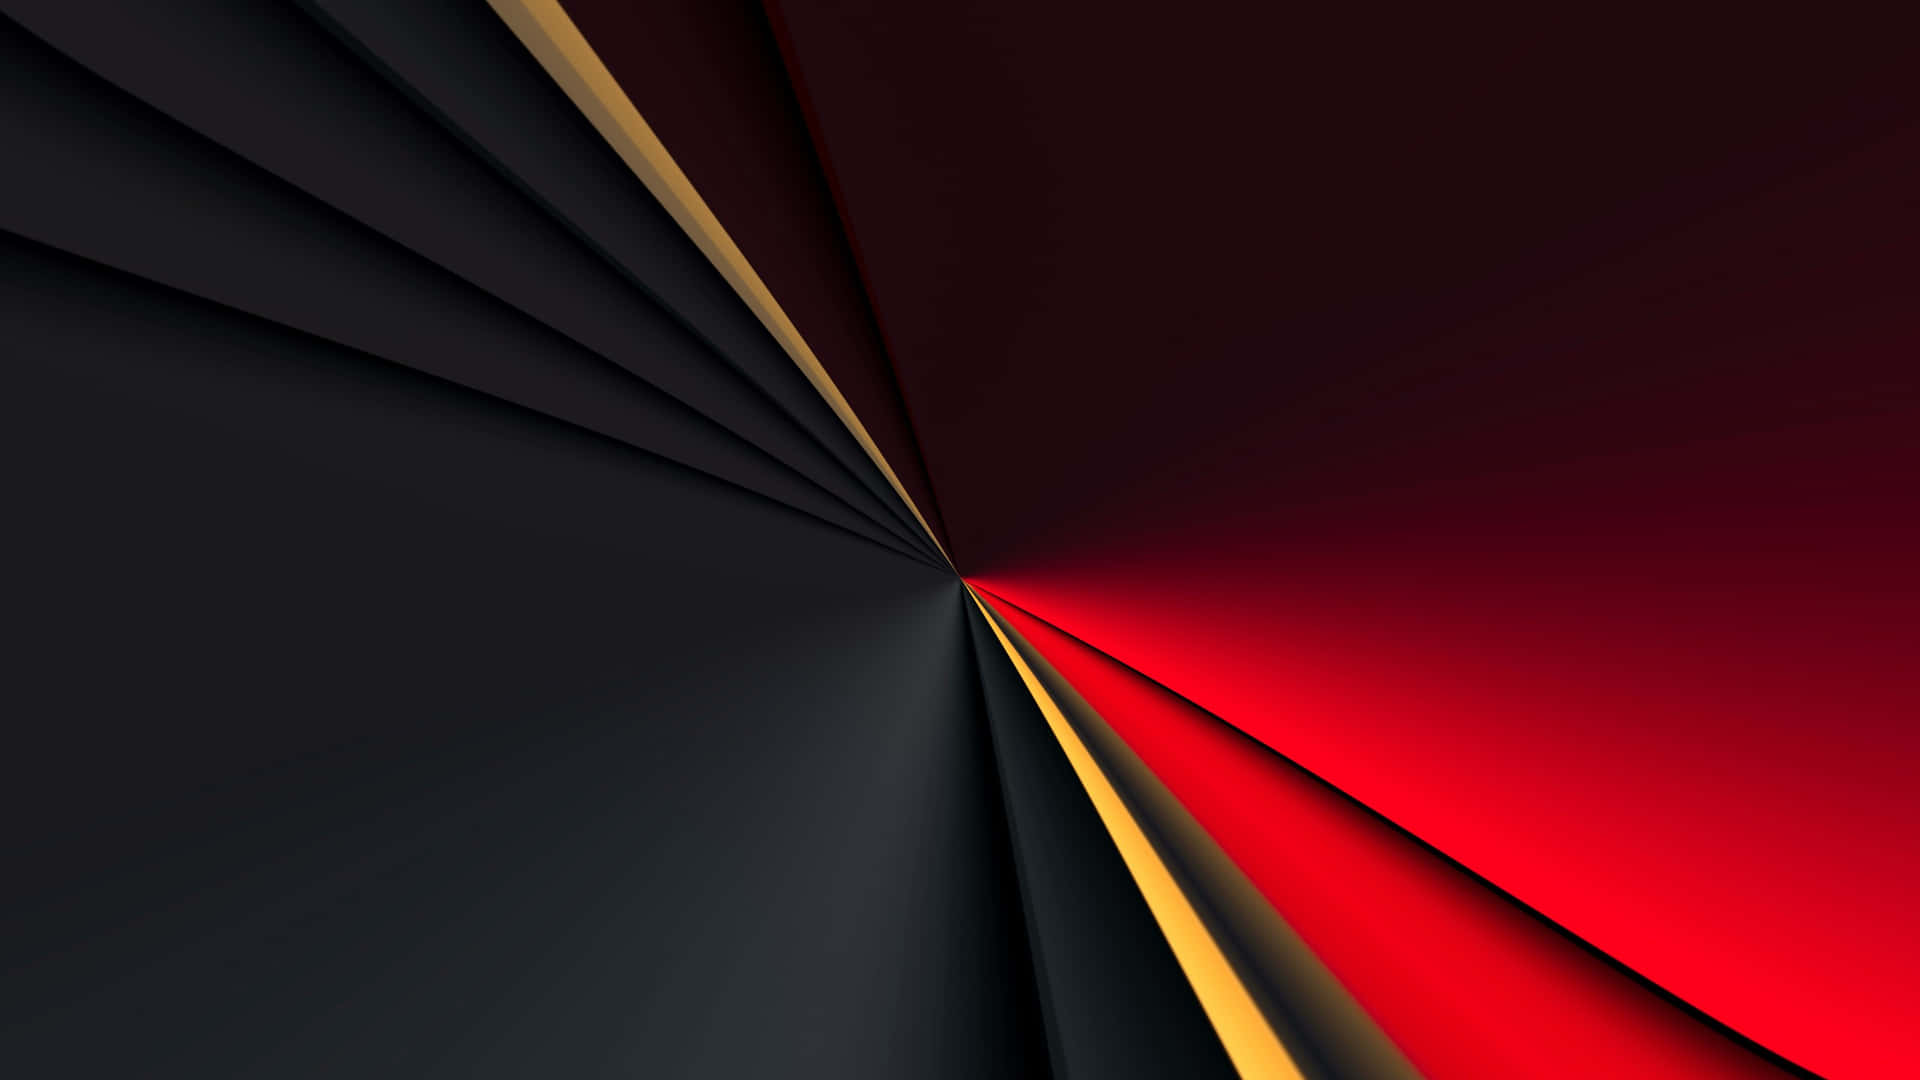 A Black And Red Abstract Background With A Black And Gold Line Wallpaper